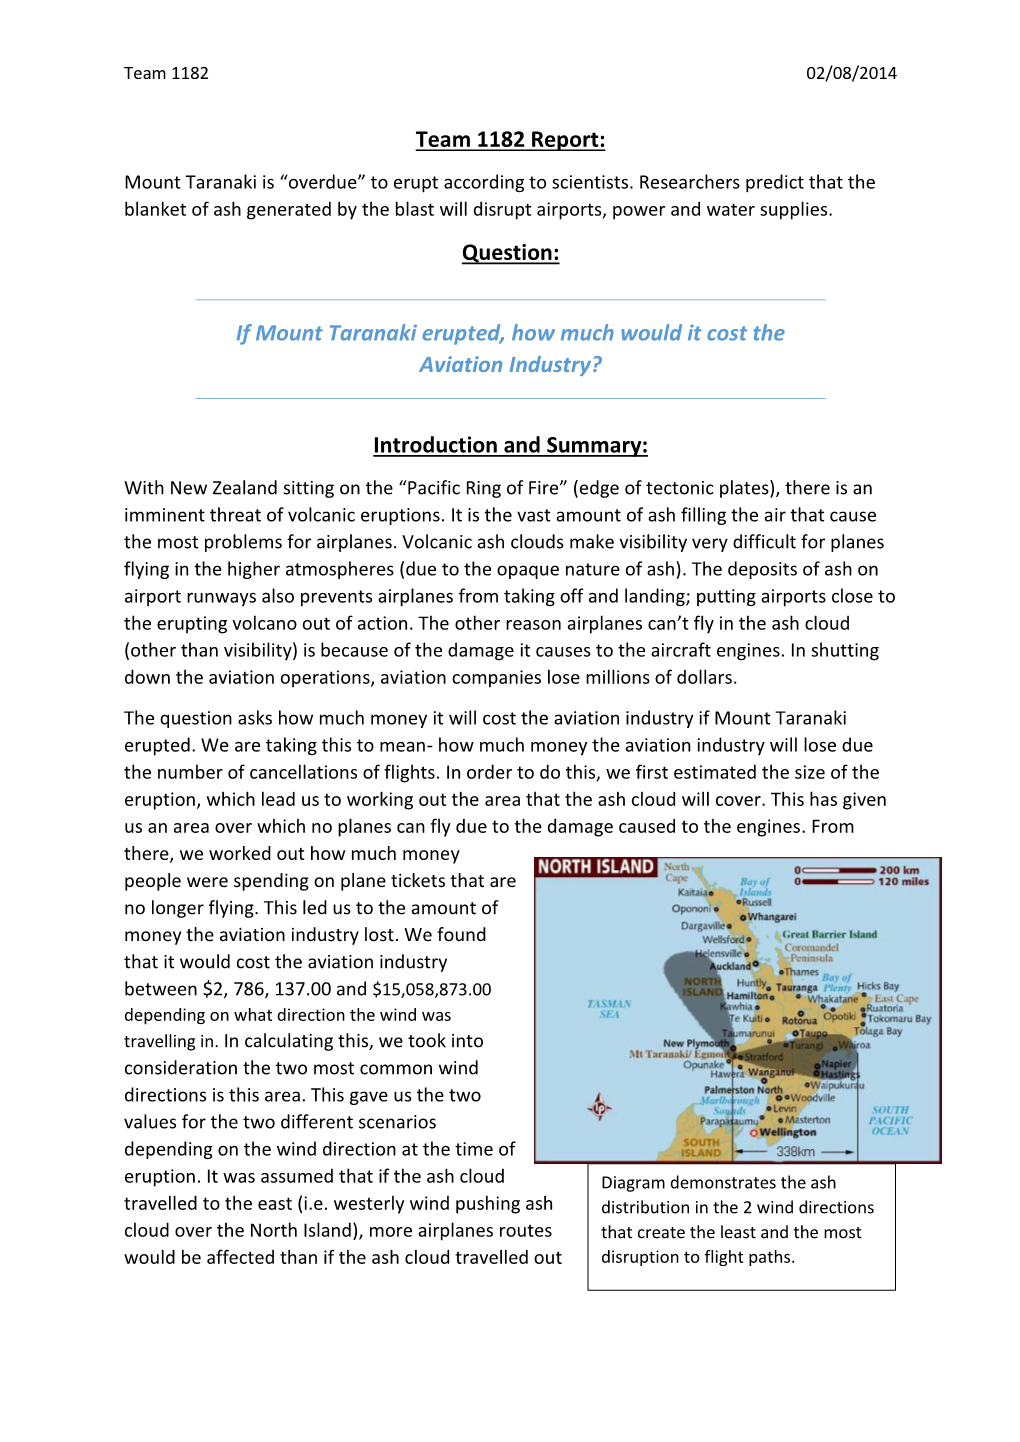 Team 1182 Report: Question: If Mount Taranaki Erupted, How Much Would It Cost the Aviation Industry? Introduction and Summary